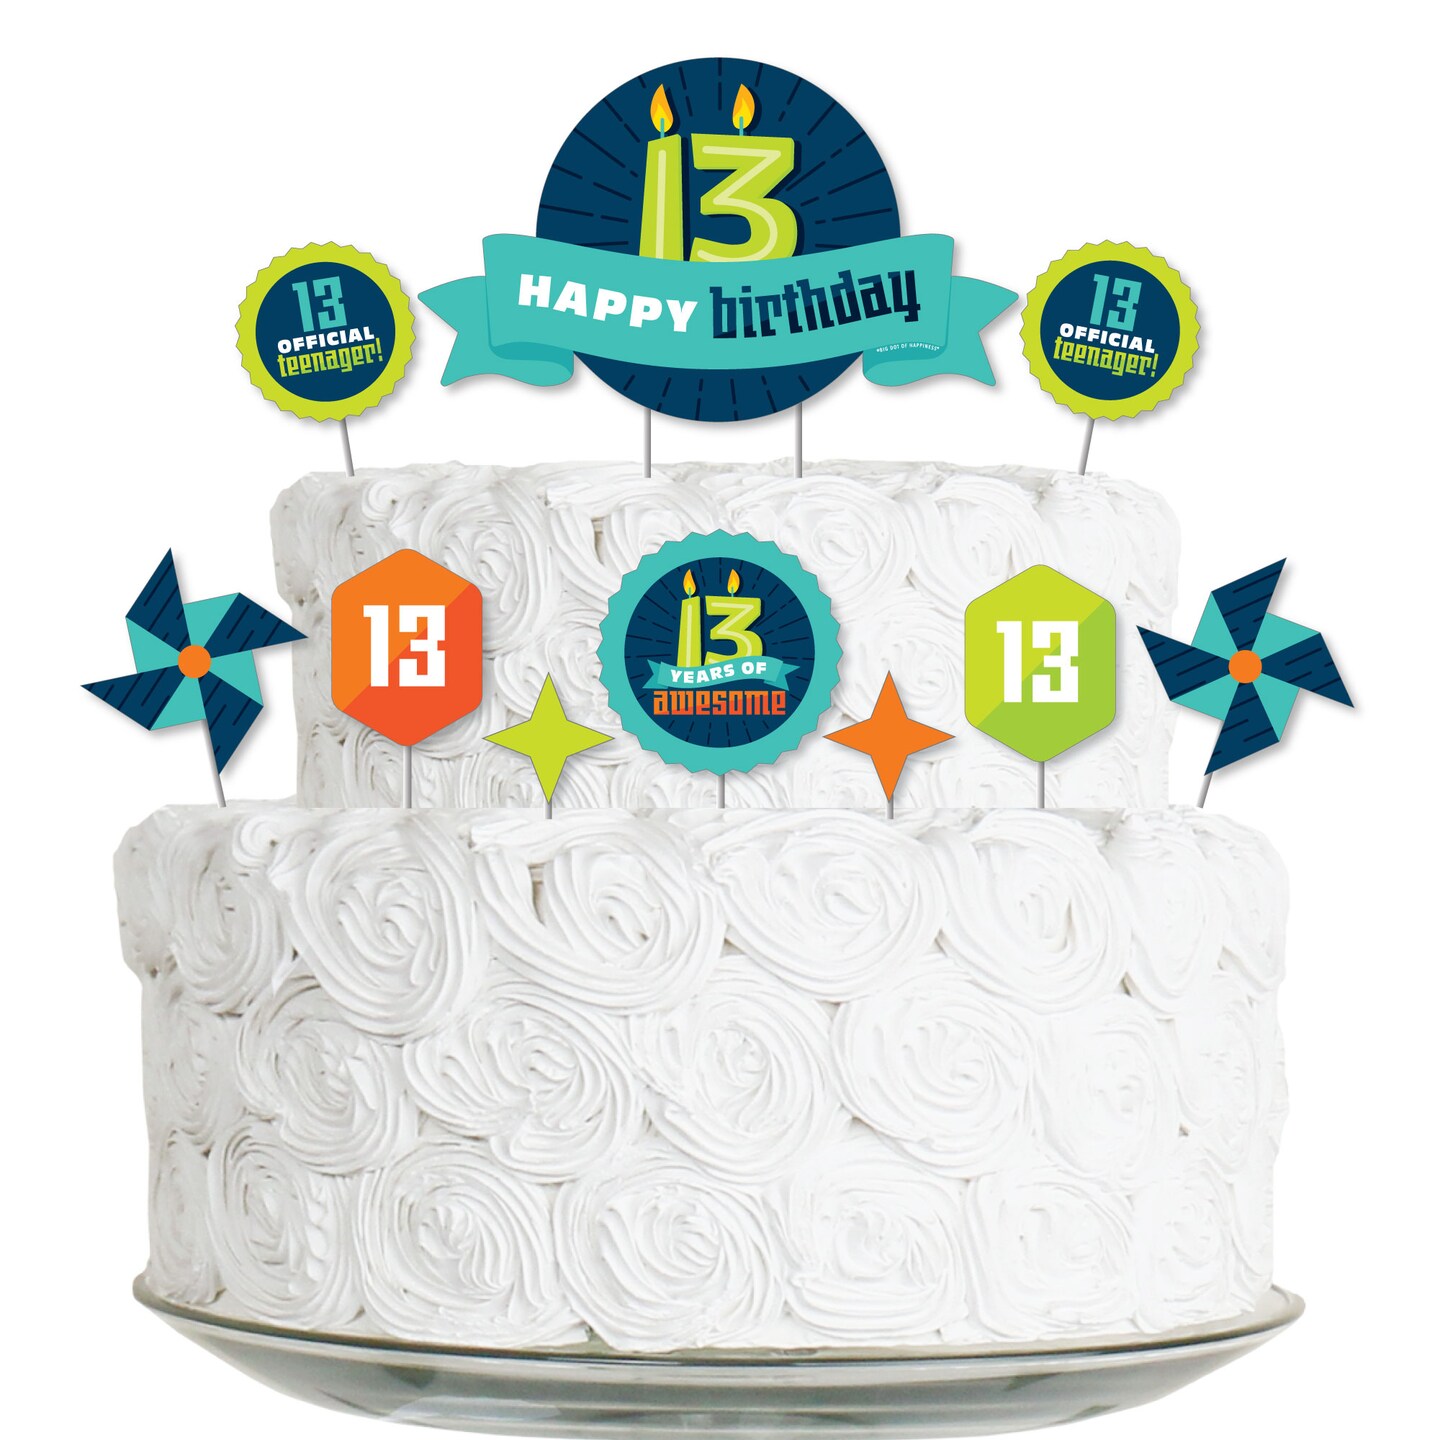 Age 13-15 Young Teen Birthday Cakes - Quality Cake Company